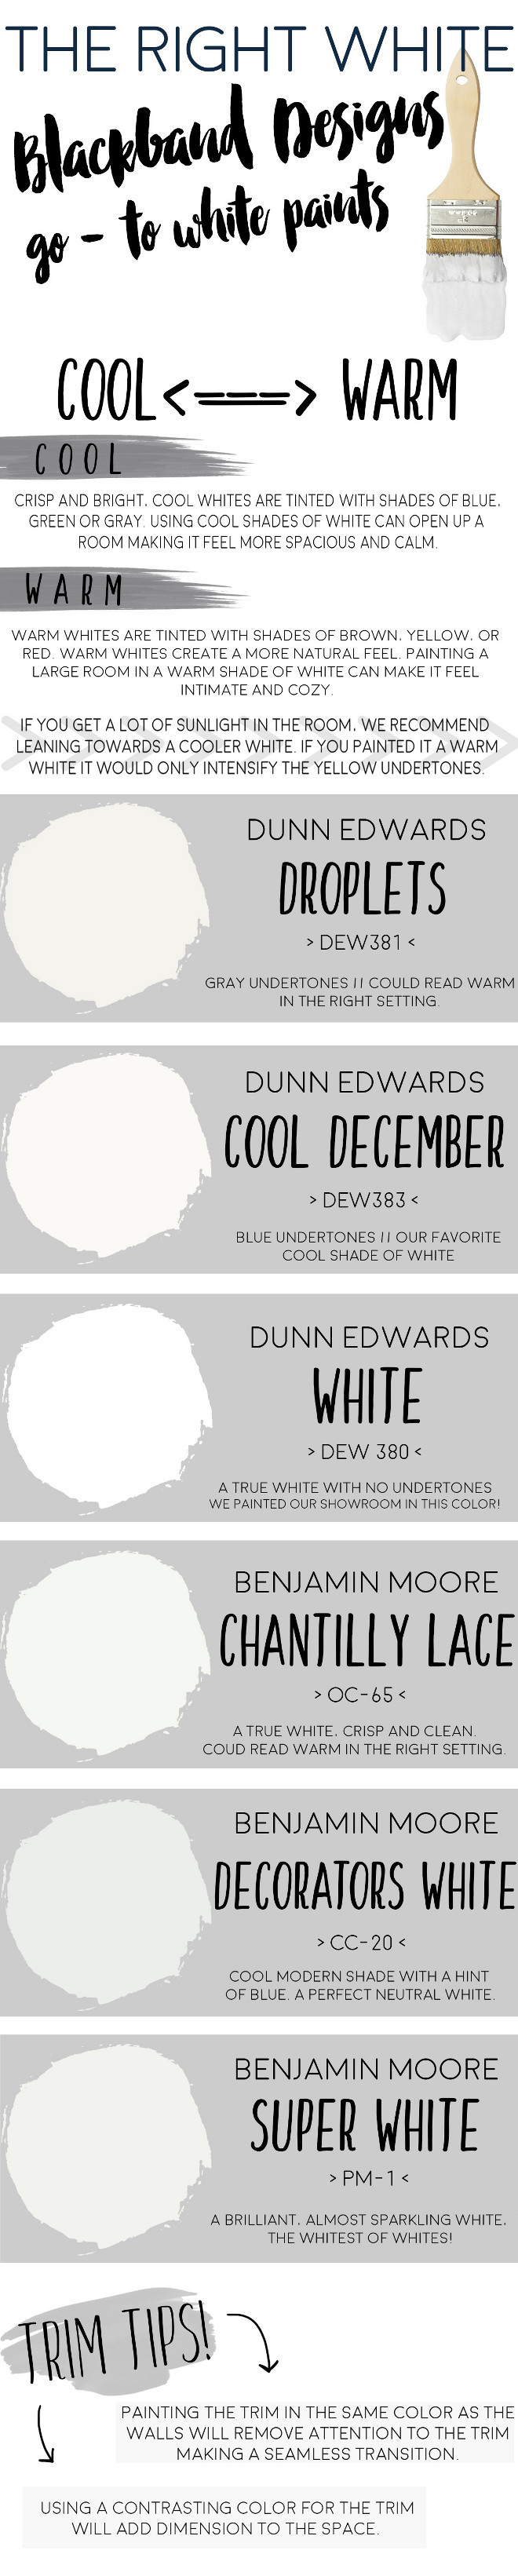 Designer Go-to White Paints. Cool and Warm White Paint. Dunn Edwards Droplets DEW 381. Dunn Edwards Cool December DEW 383. Dunn Edwards White DEW 380. Benjamin Moore Chantilly Lace OC-65. Benjamin Moore Decorators White CC-20. Benjamin Moore Super White PM-1. 